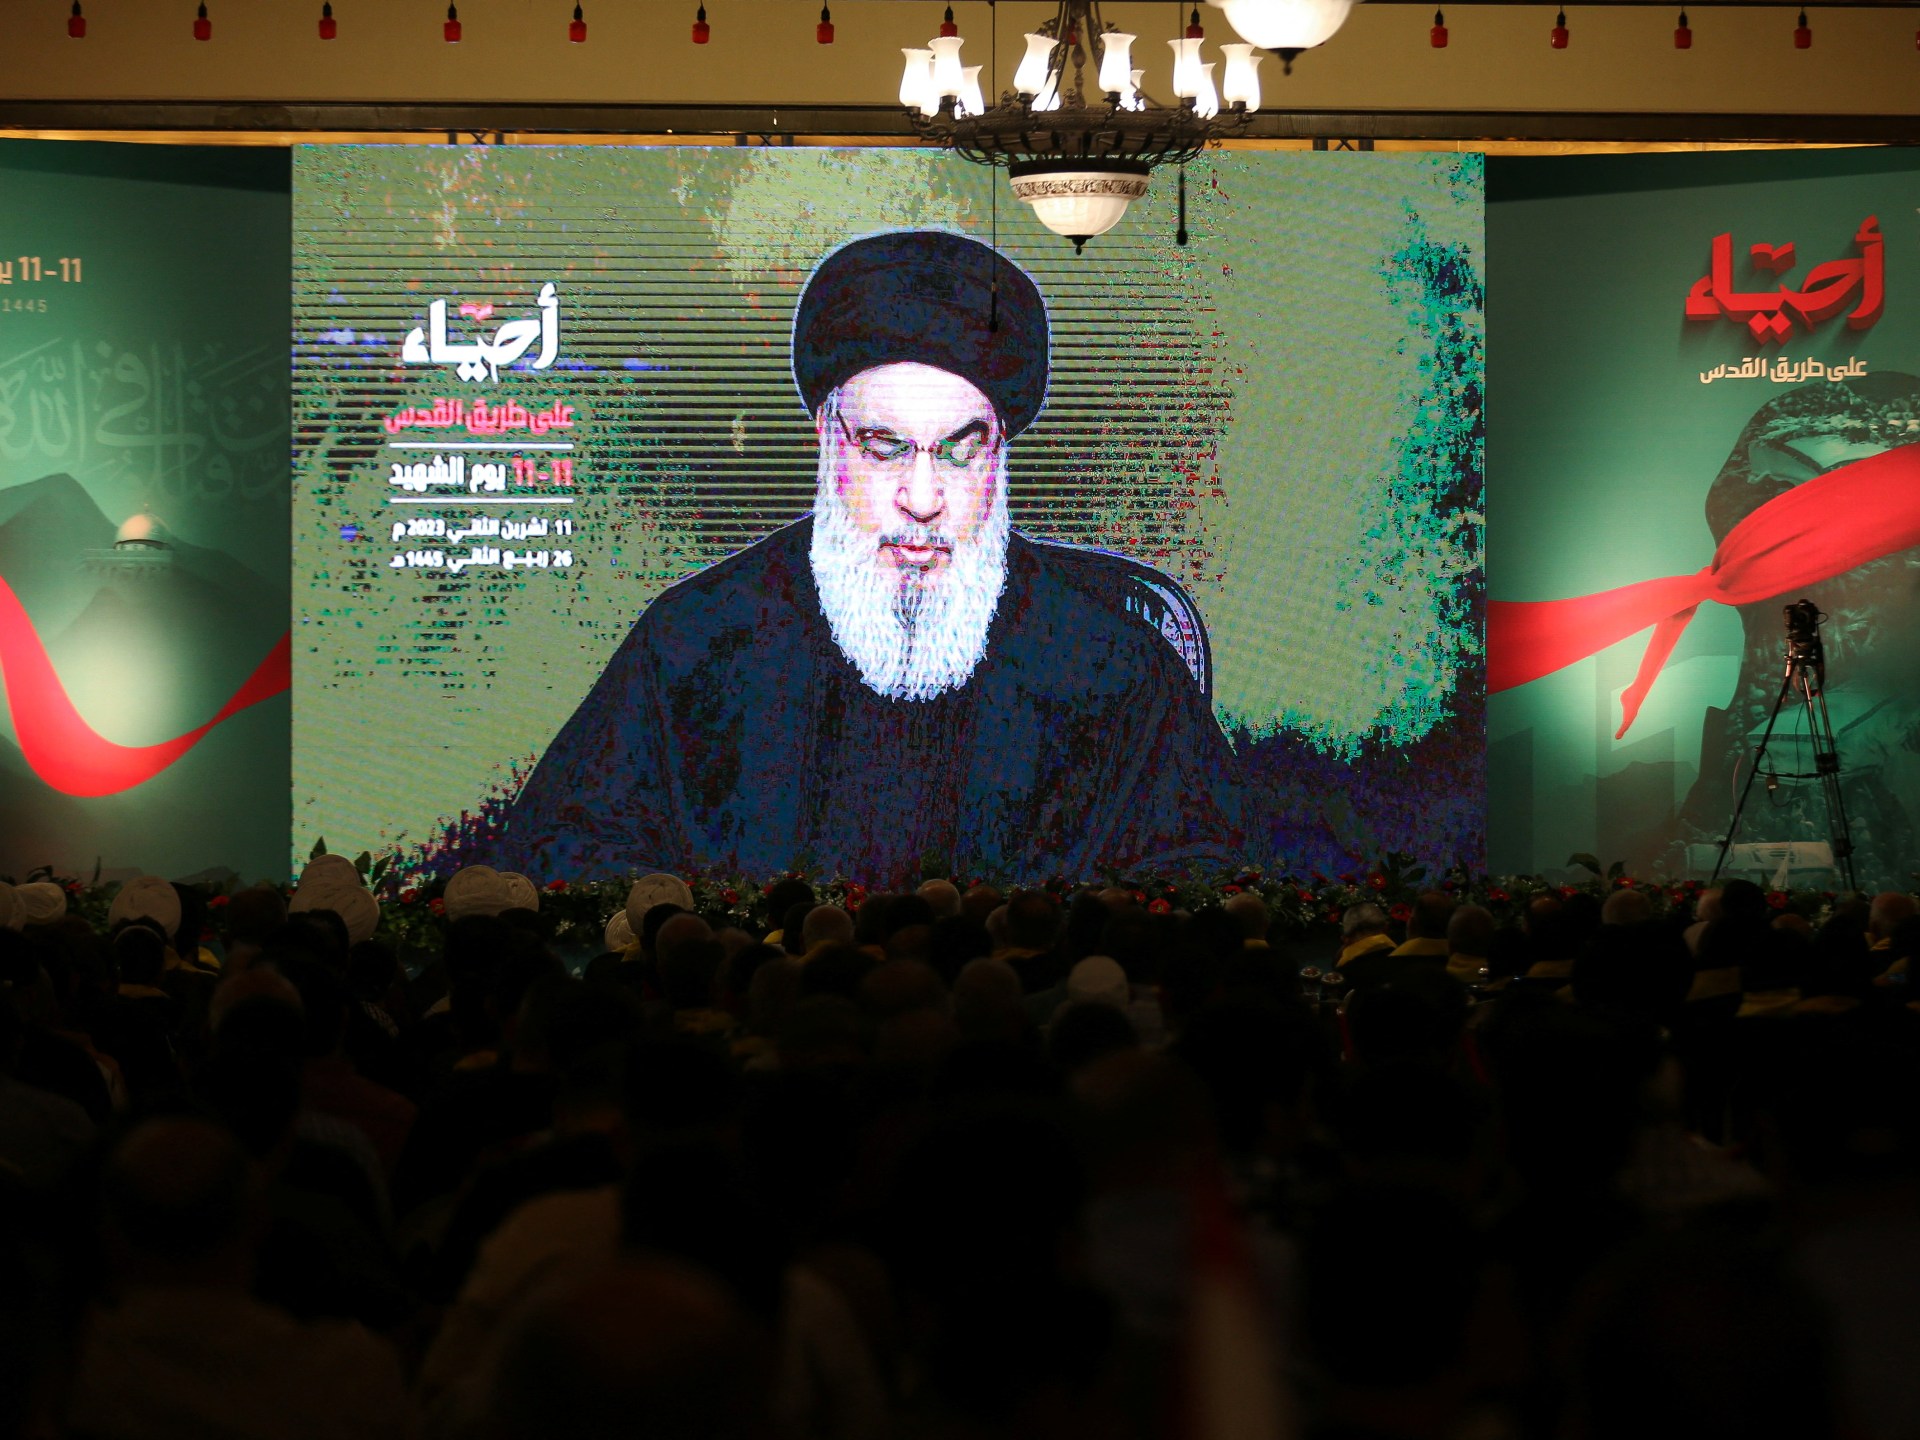 Palestinians in Lebanon disappointed that Hezbollah won’t escalate thumbnail